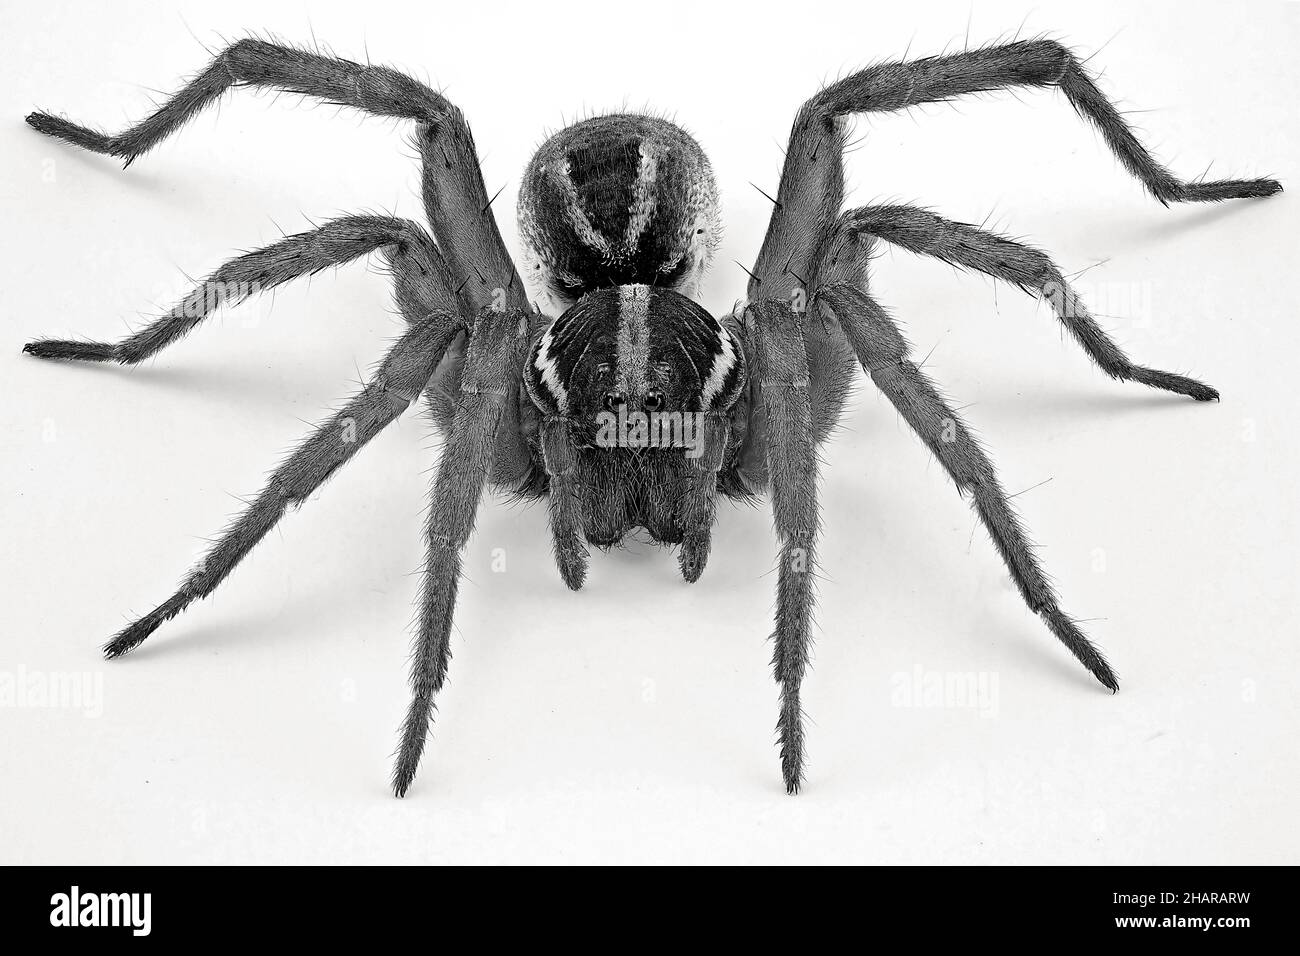 Close up of a wolf spider isolated on a white background to show all the details Stock Photo